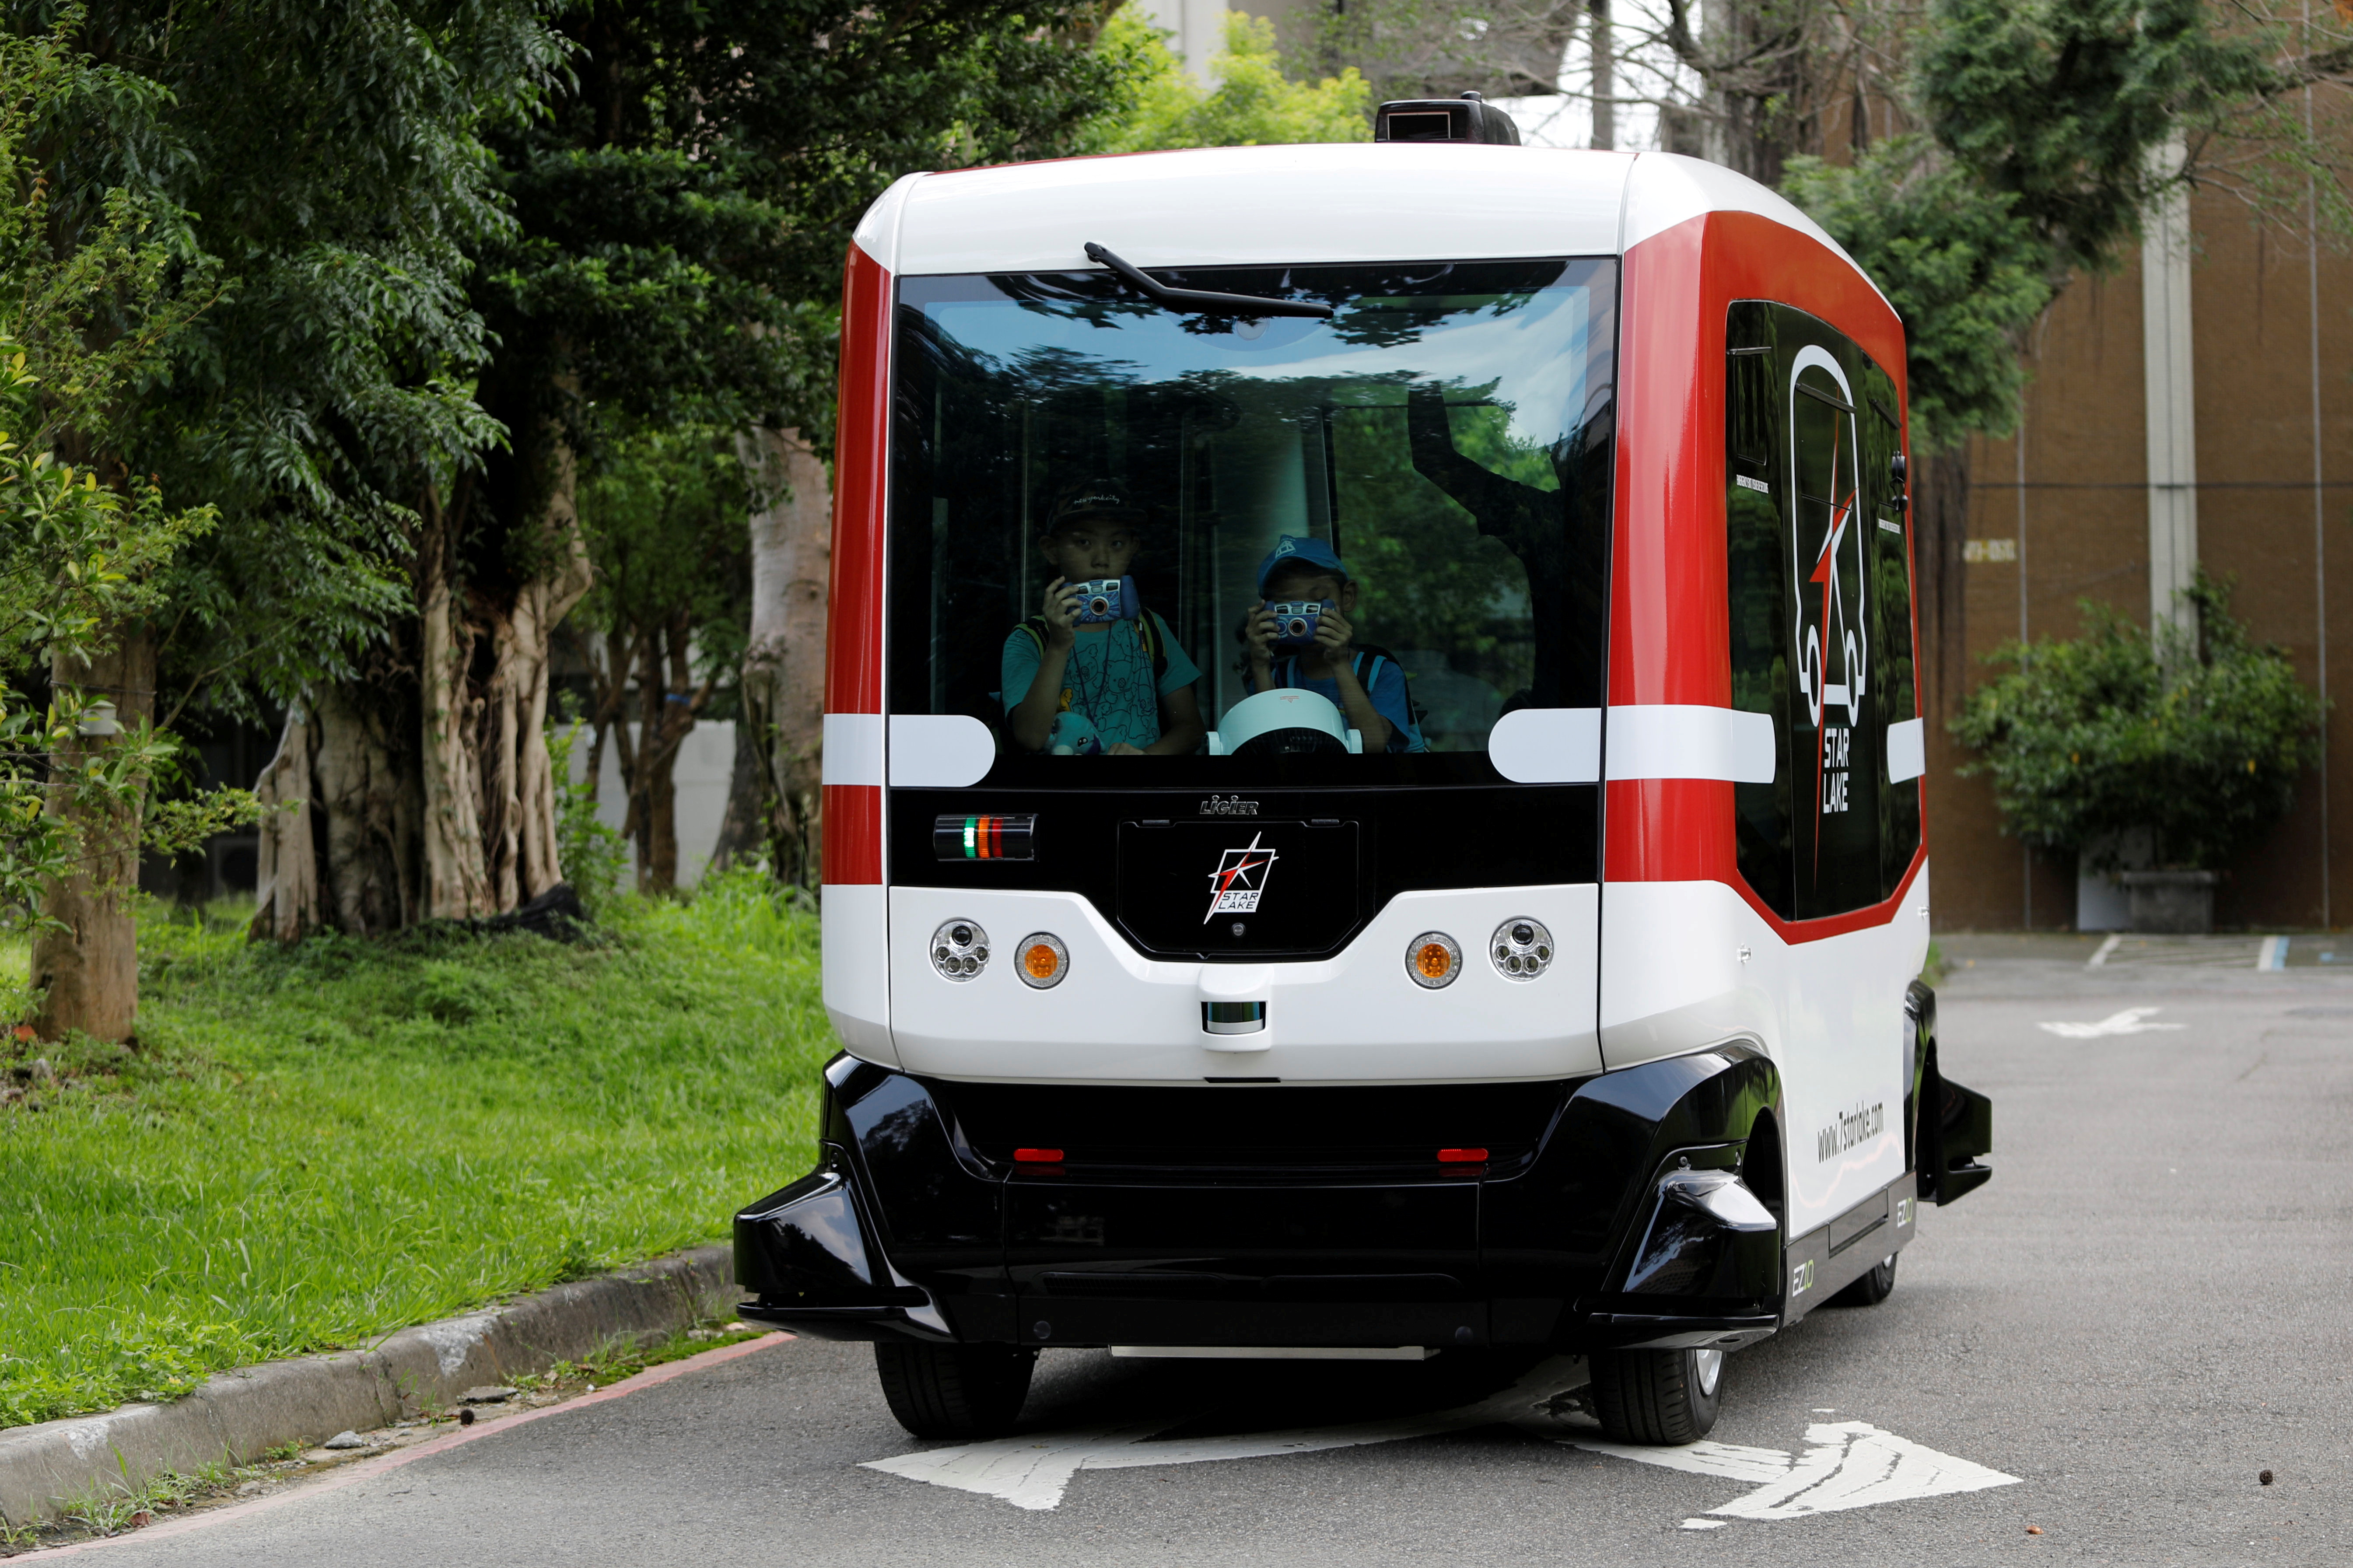 French-made 'EZ10' autonomous bus, also known as a driverless vehicle, runs at university campus in Taipei